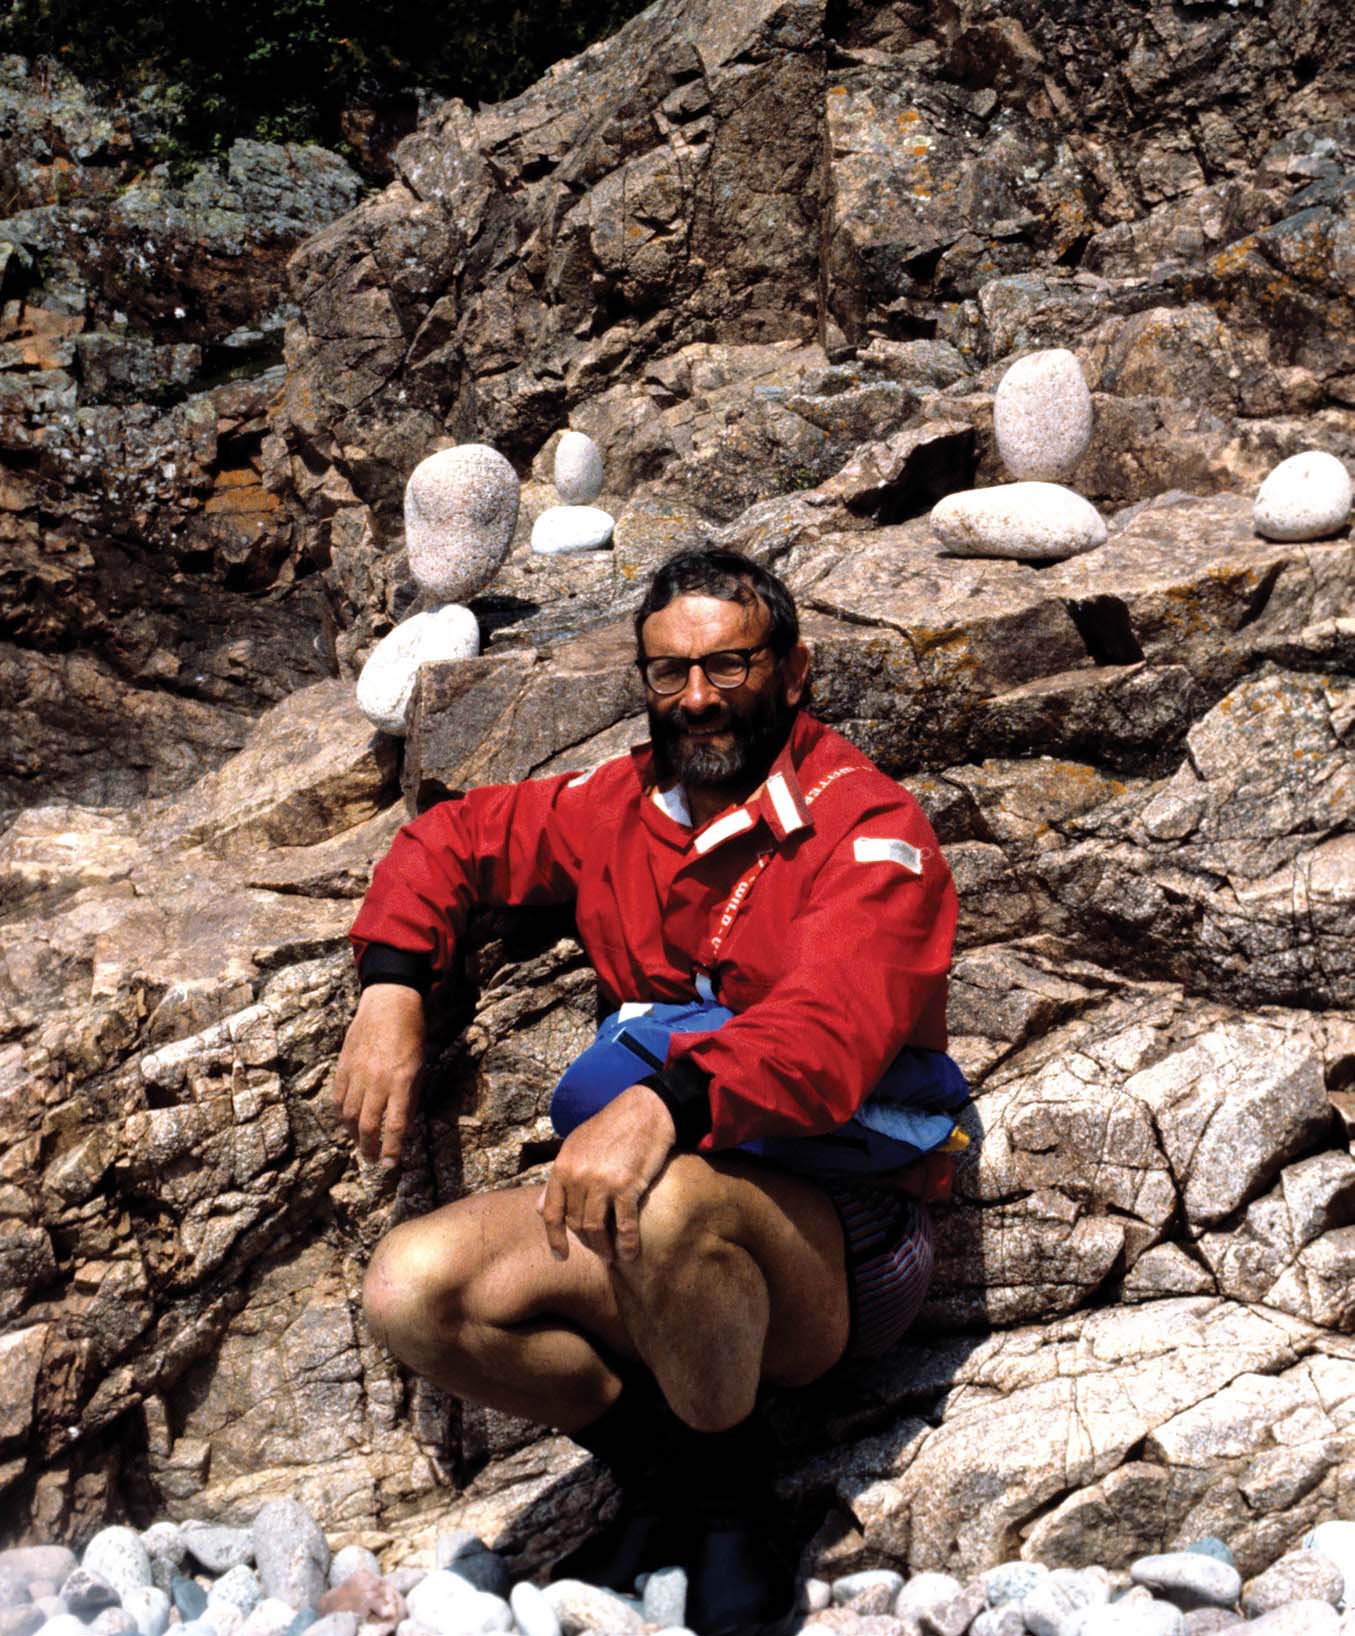 Frank Goodman poses in red drytop on a rocky, pebbly beach